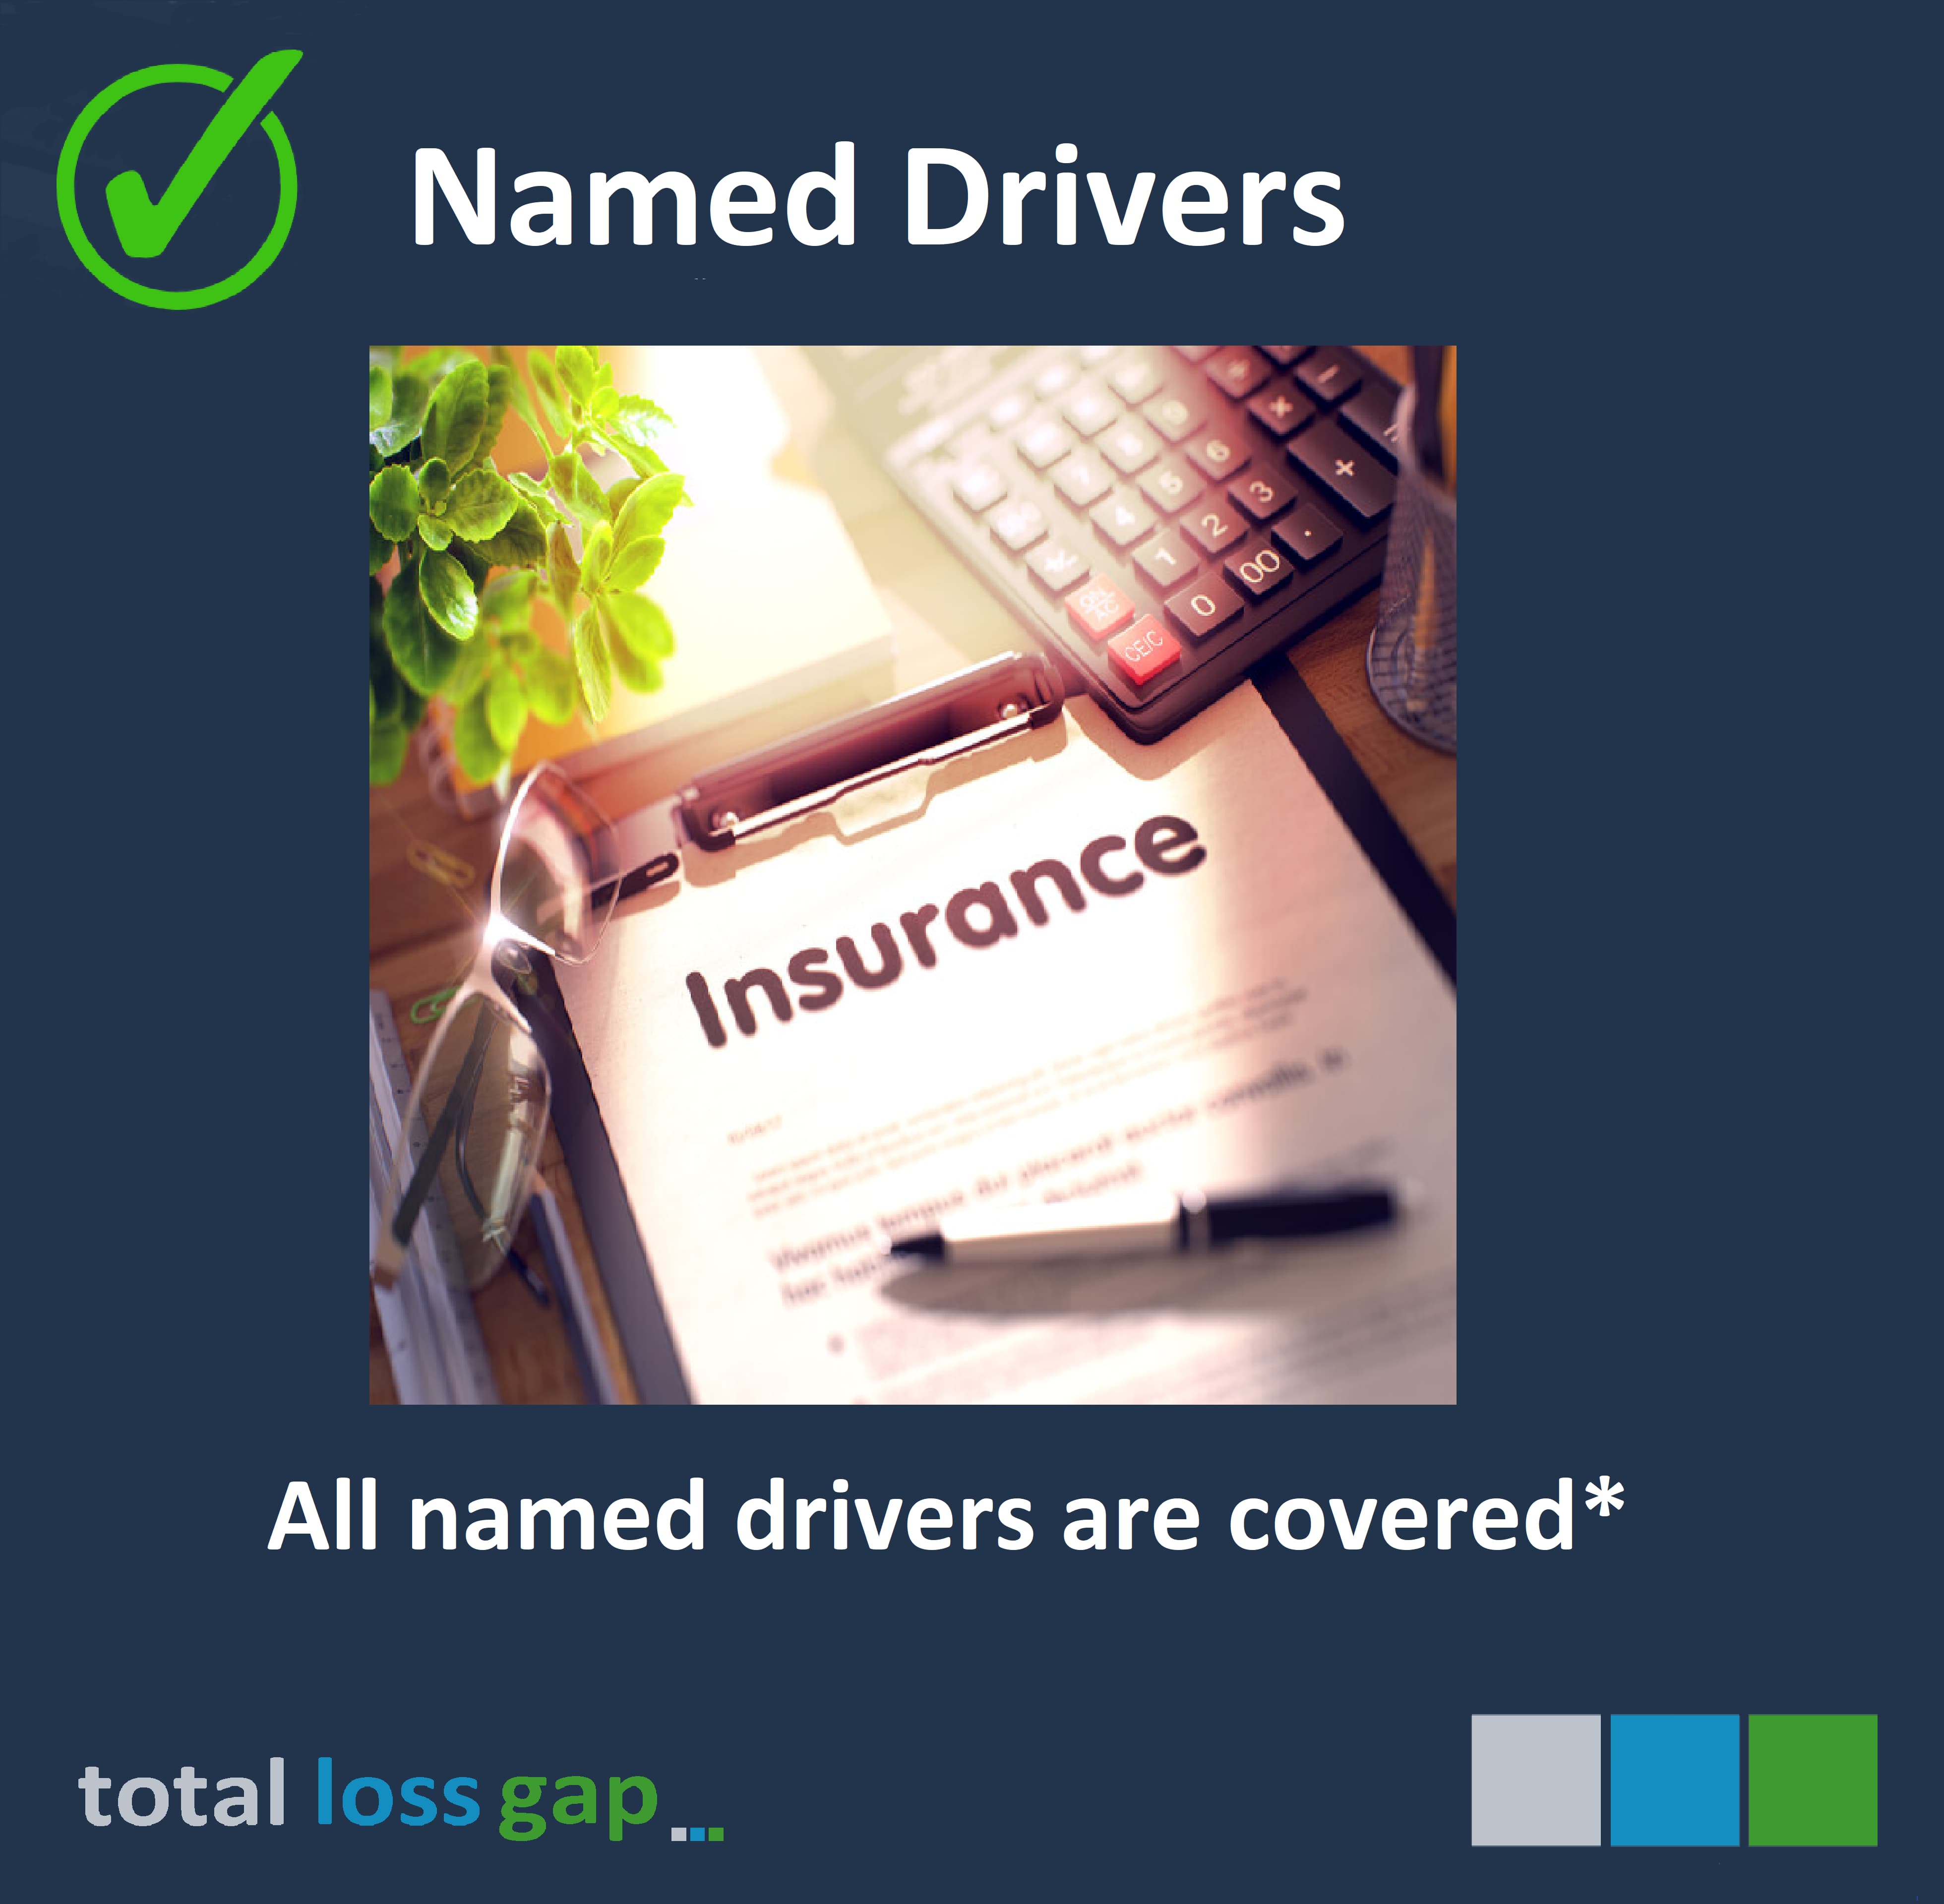 All named drivers are covered. T&C's apply